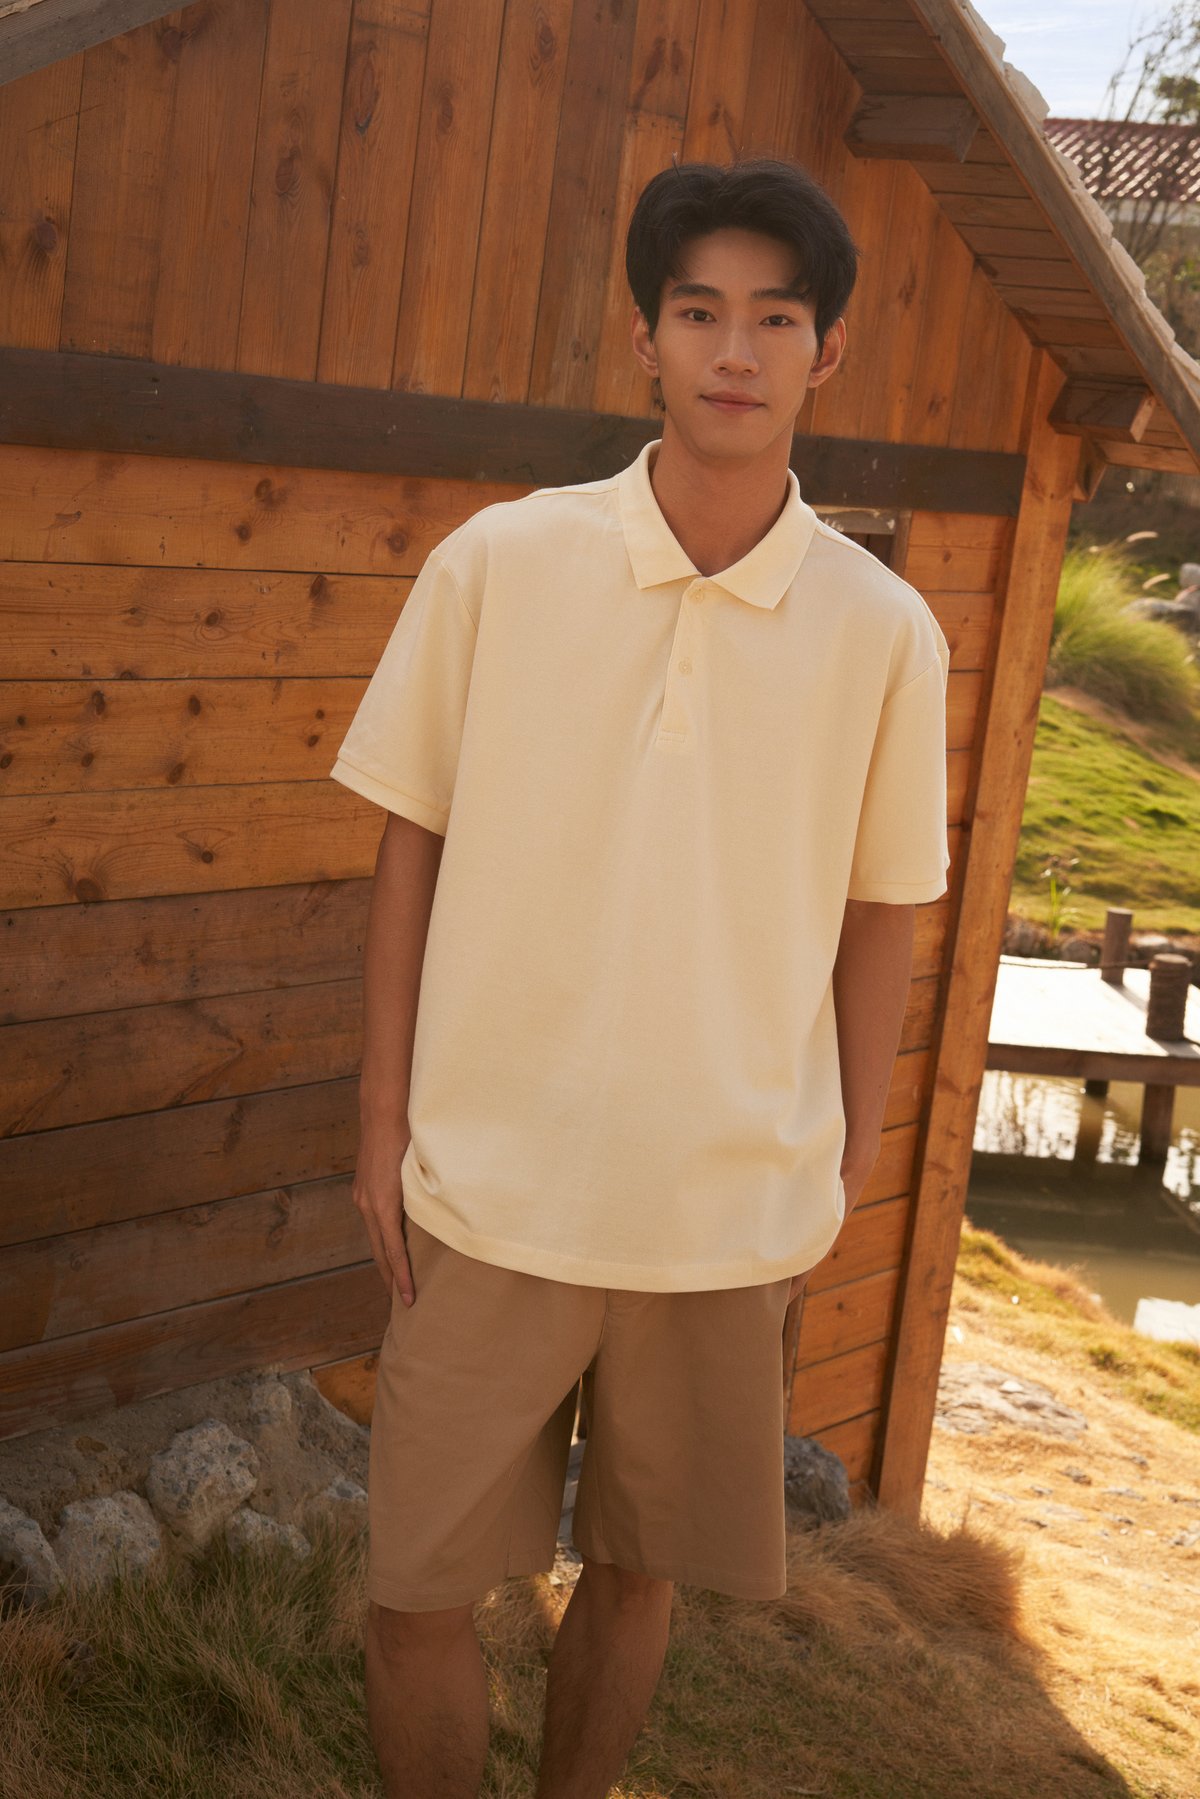 Men's Karter Polo Tee in Pale Yellow